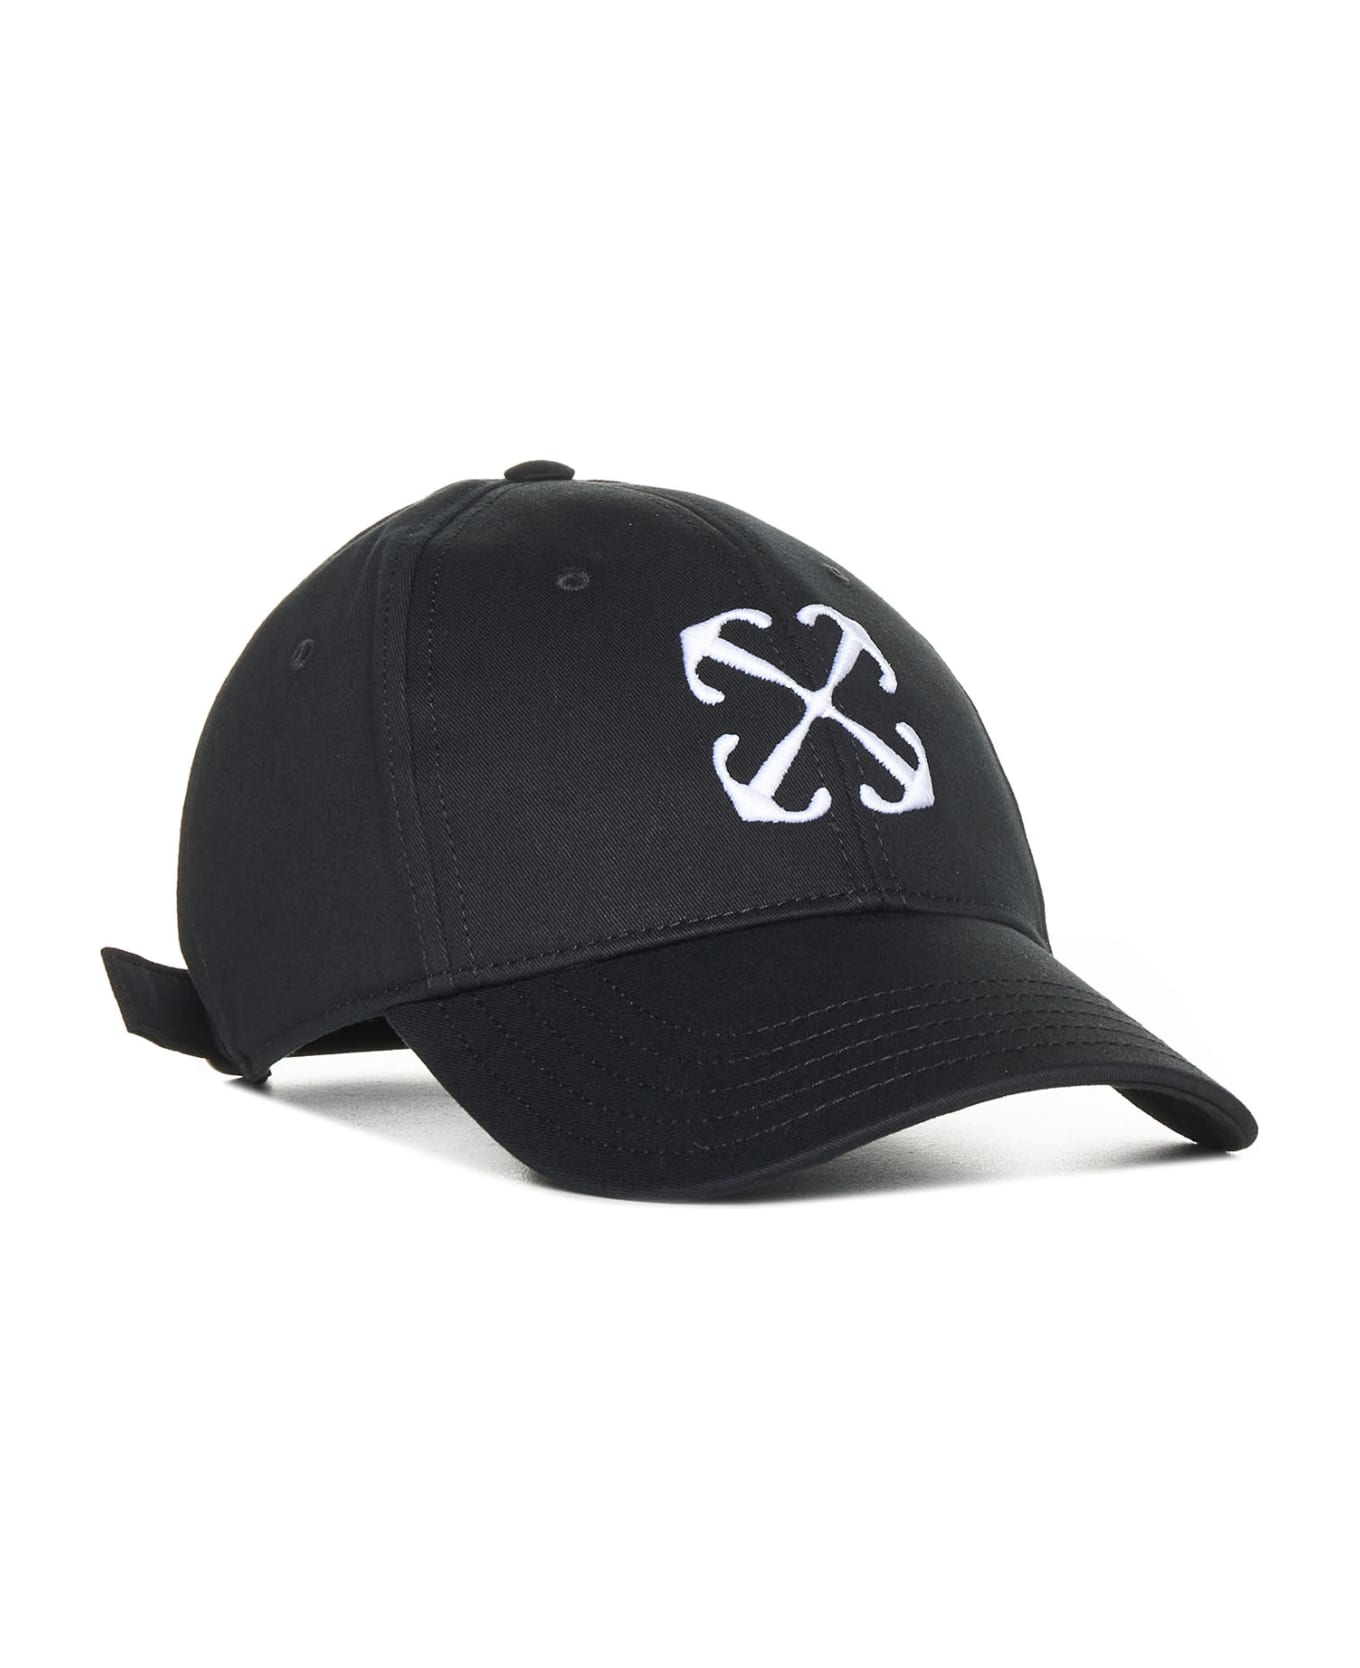 Off-White Baseball Cap With Embroidery - Black white